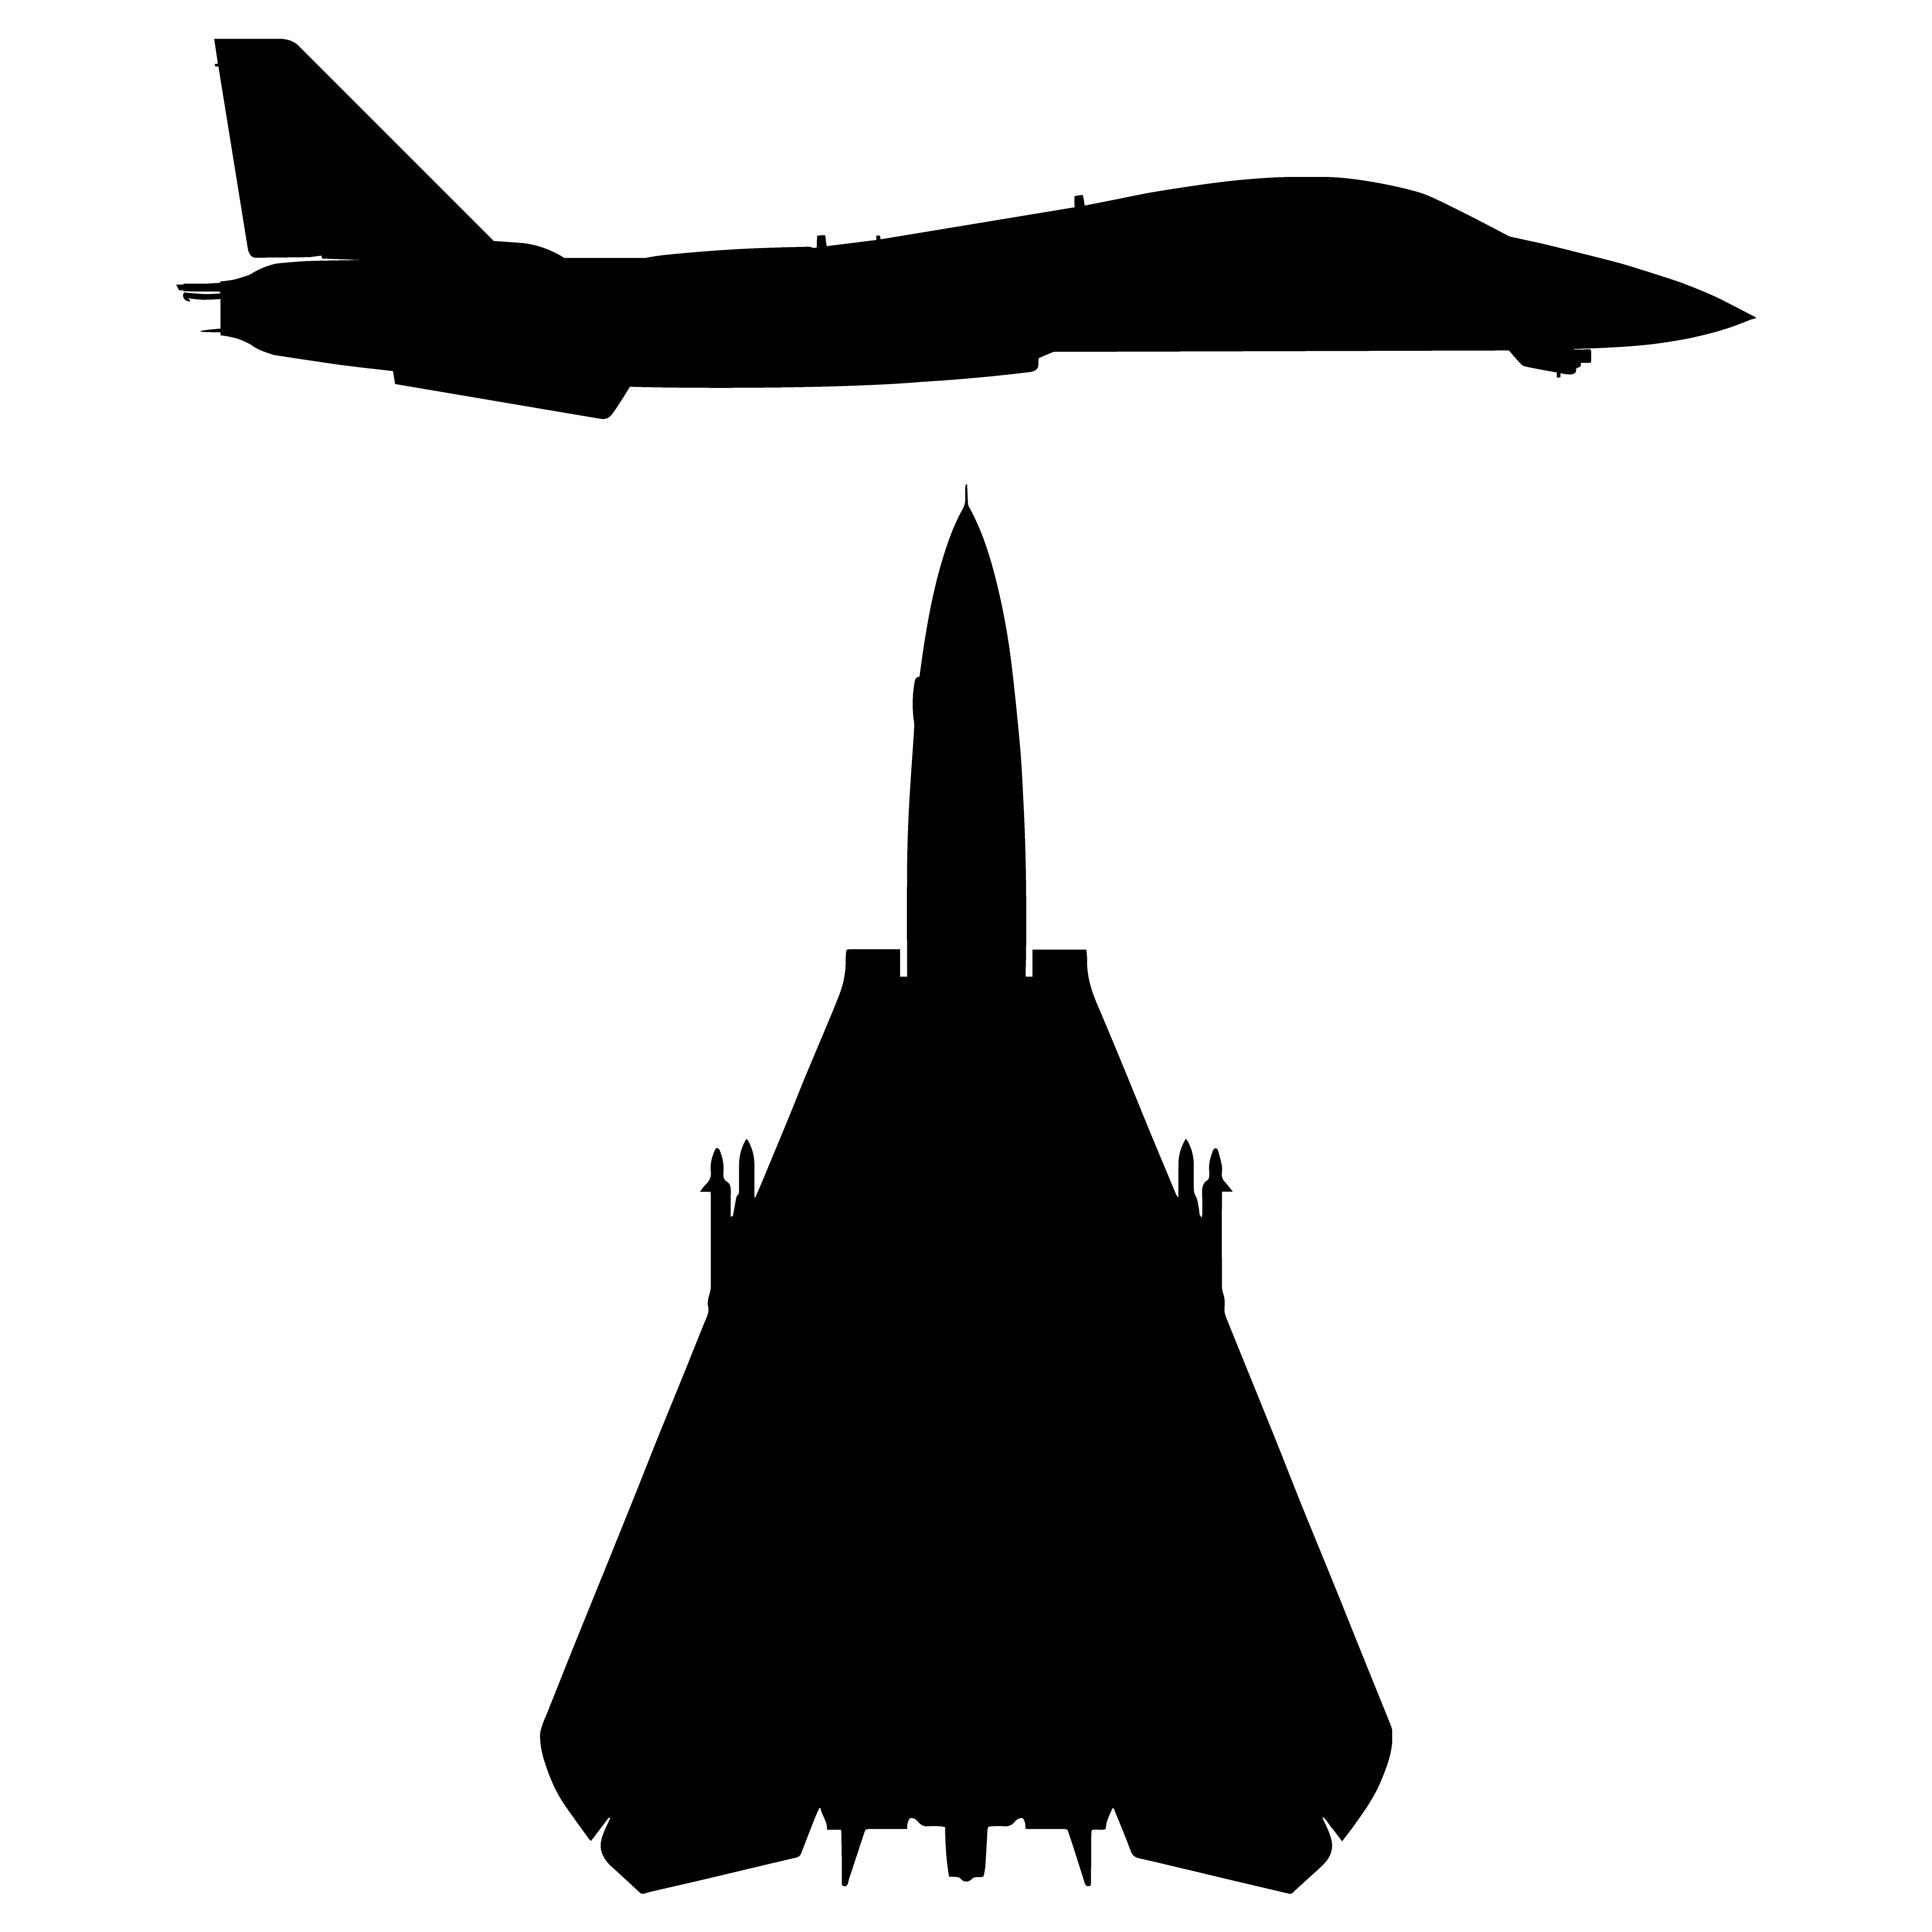 Browse 270 incredible Fighter Jet Silhouette vectors, icons, clipart graphi...